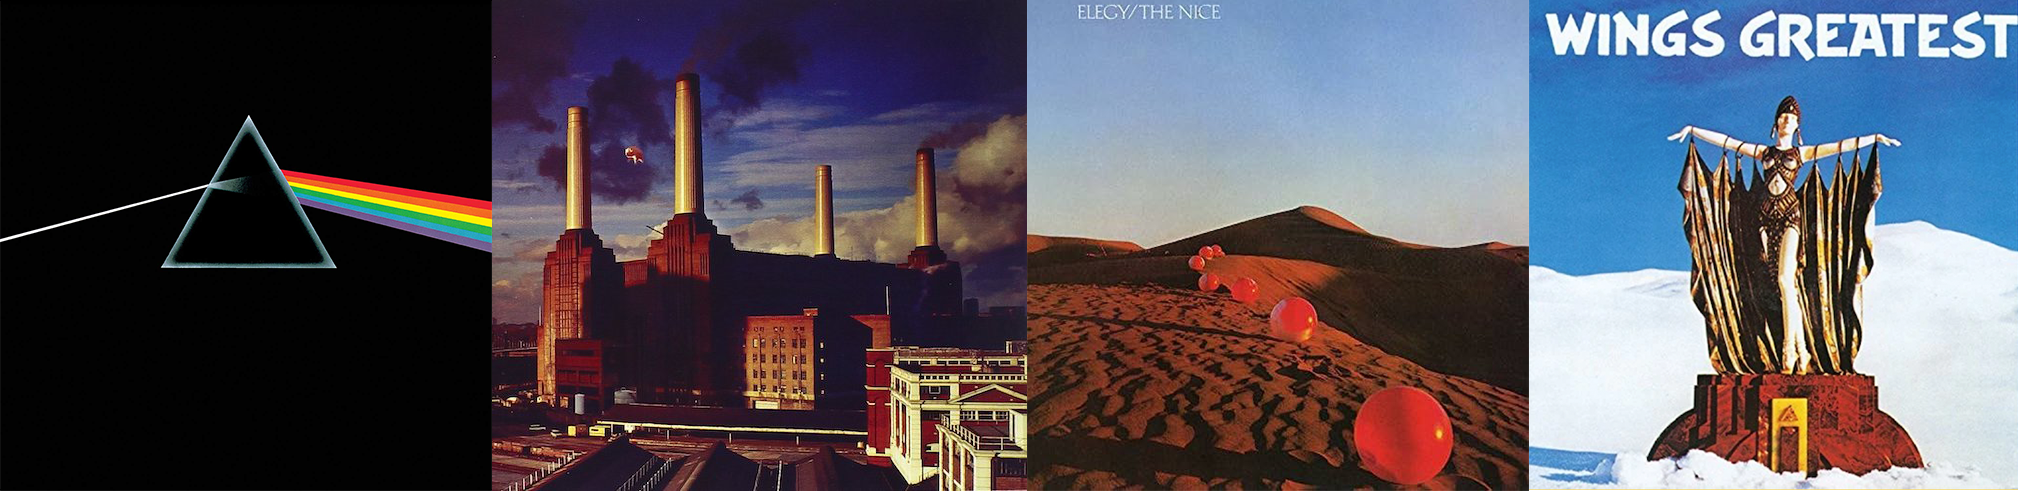 Covers produced by Hipgnosis: Pink Floyd's Dark Side of the Moon; Pink Floyd's Animals; Elegy's The Nice; and Wing's Greatest